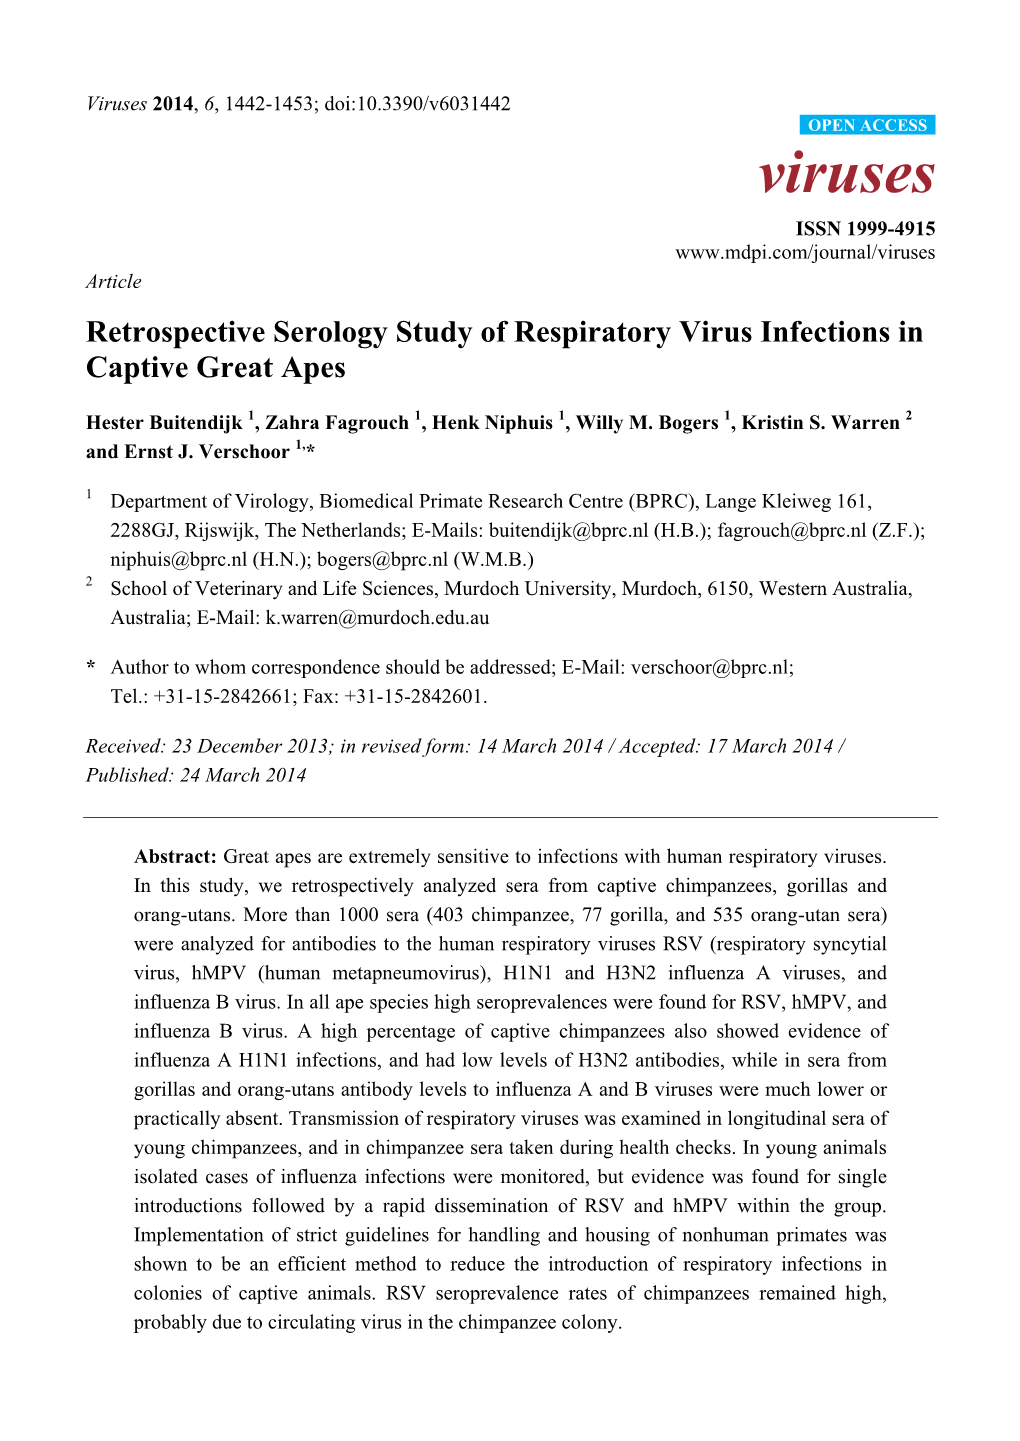 Retrospective Serology Study of Respiratory Virus Infections in Captive Great Apes